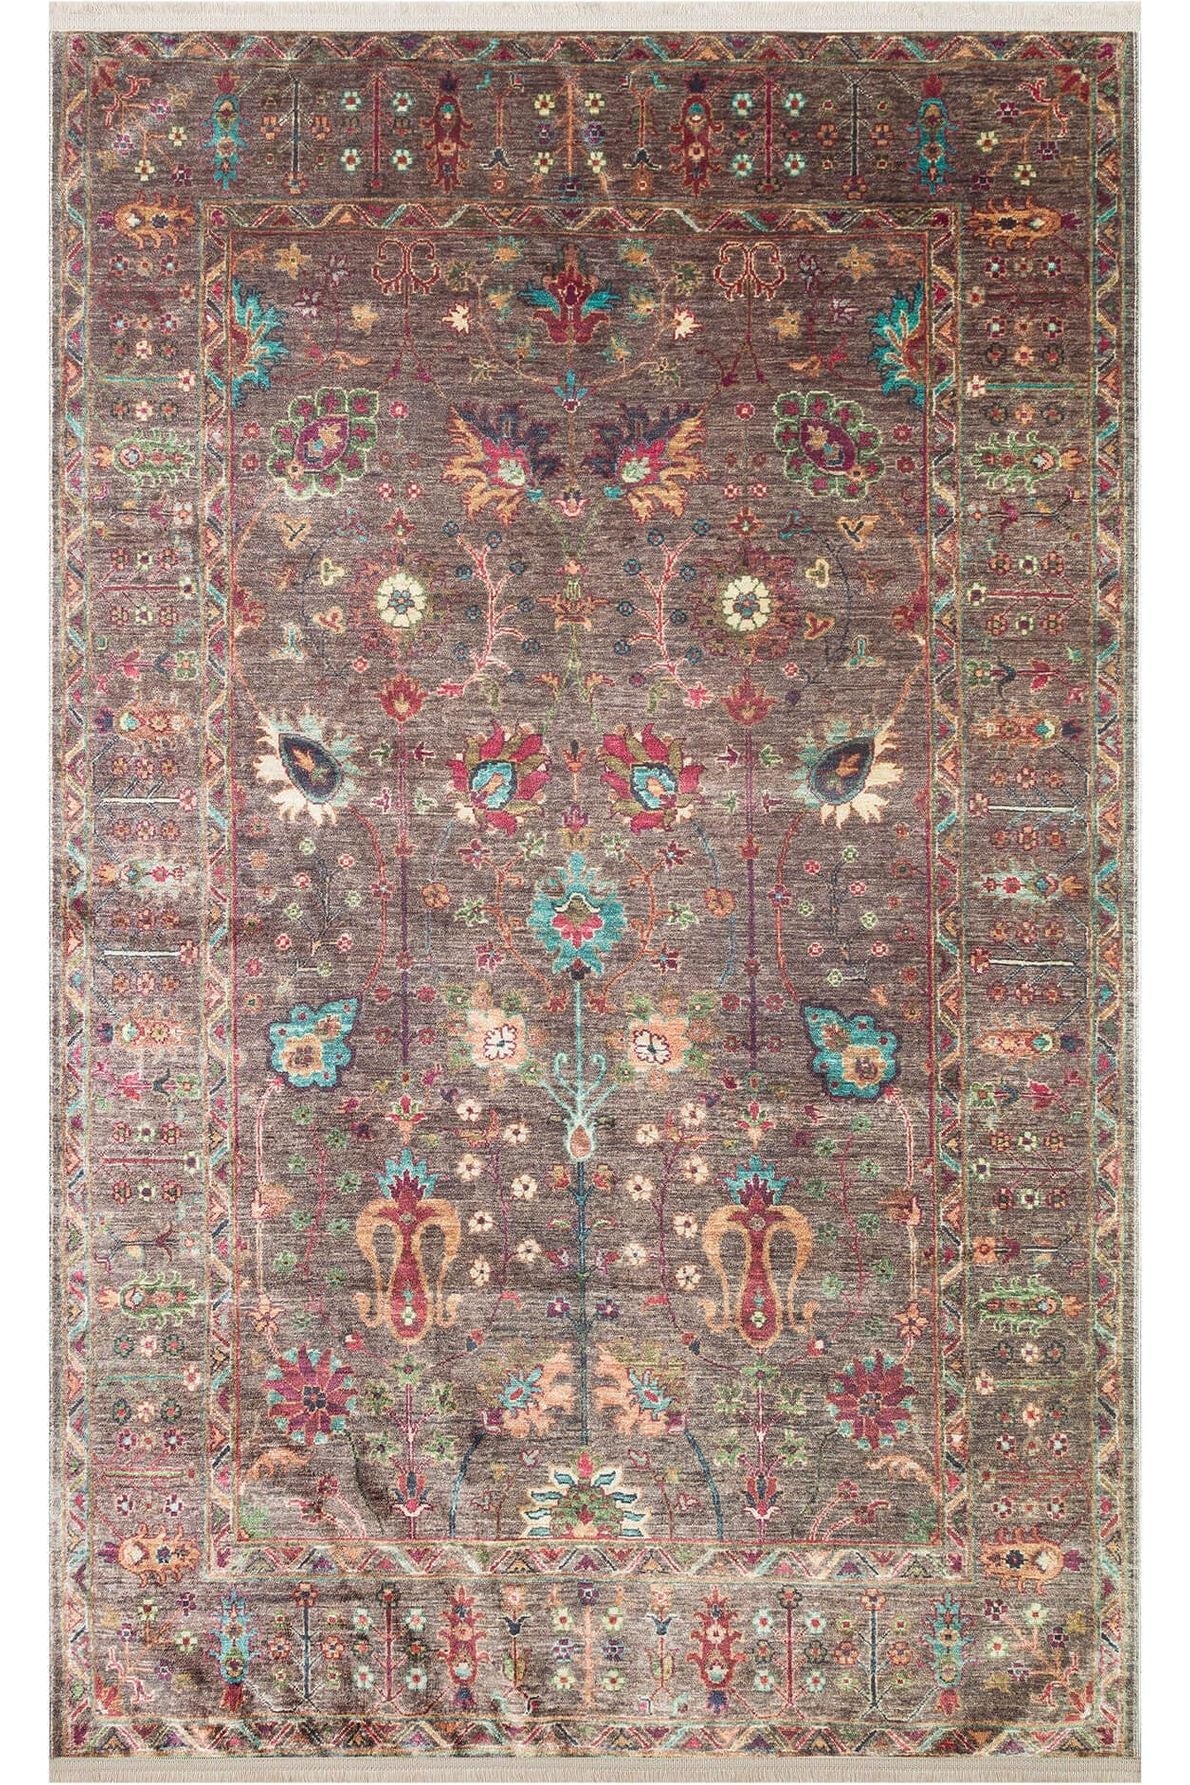 #Turkish_Carpets_Rugs# #Modern_Carpets# #Abrash_Carpets#User-Friendly Washable Anti-Slippery Made Carpets With Antique DesignsAtk 10 D.Multy